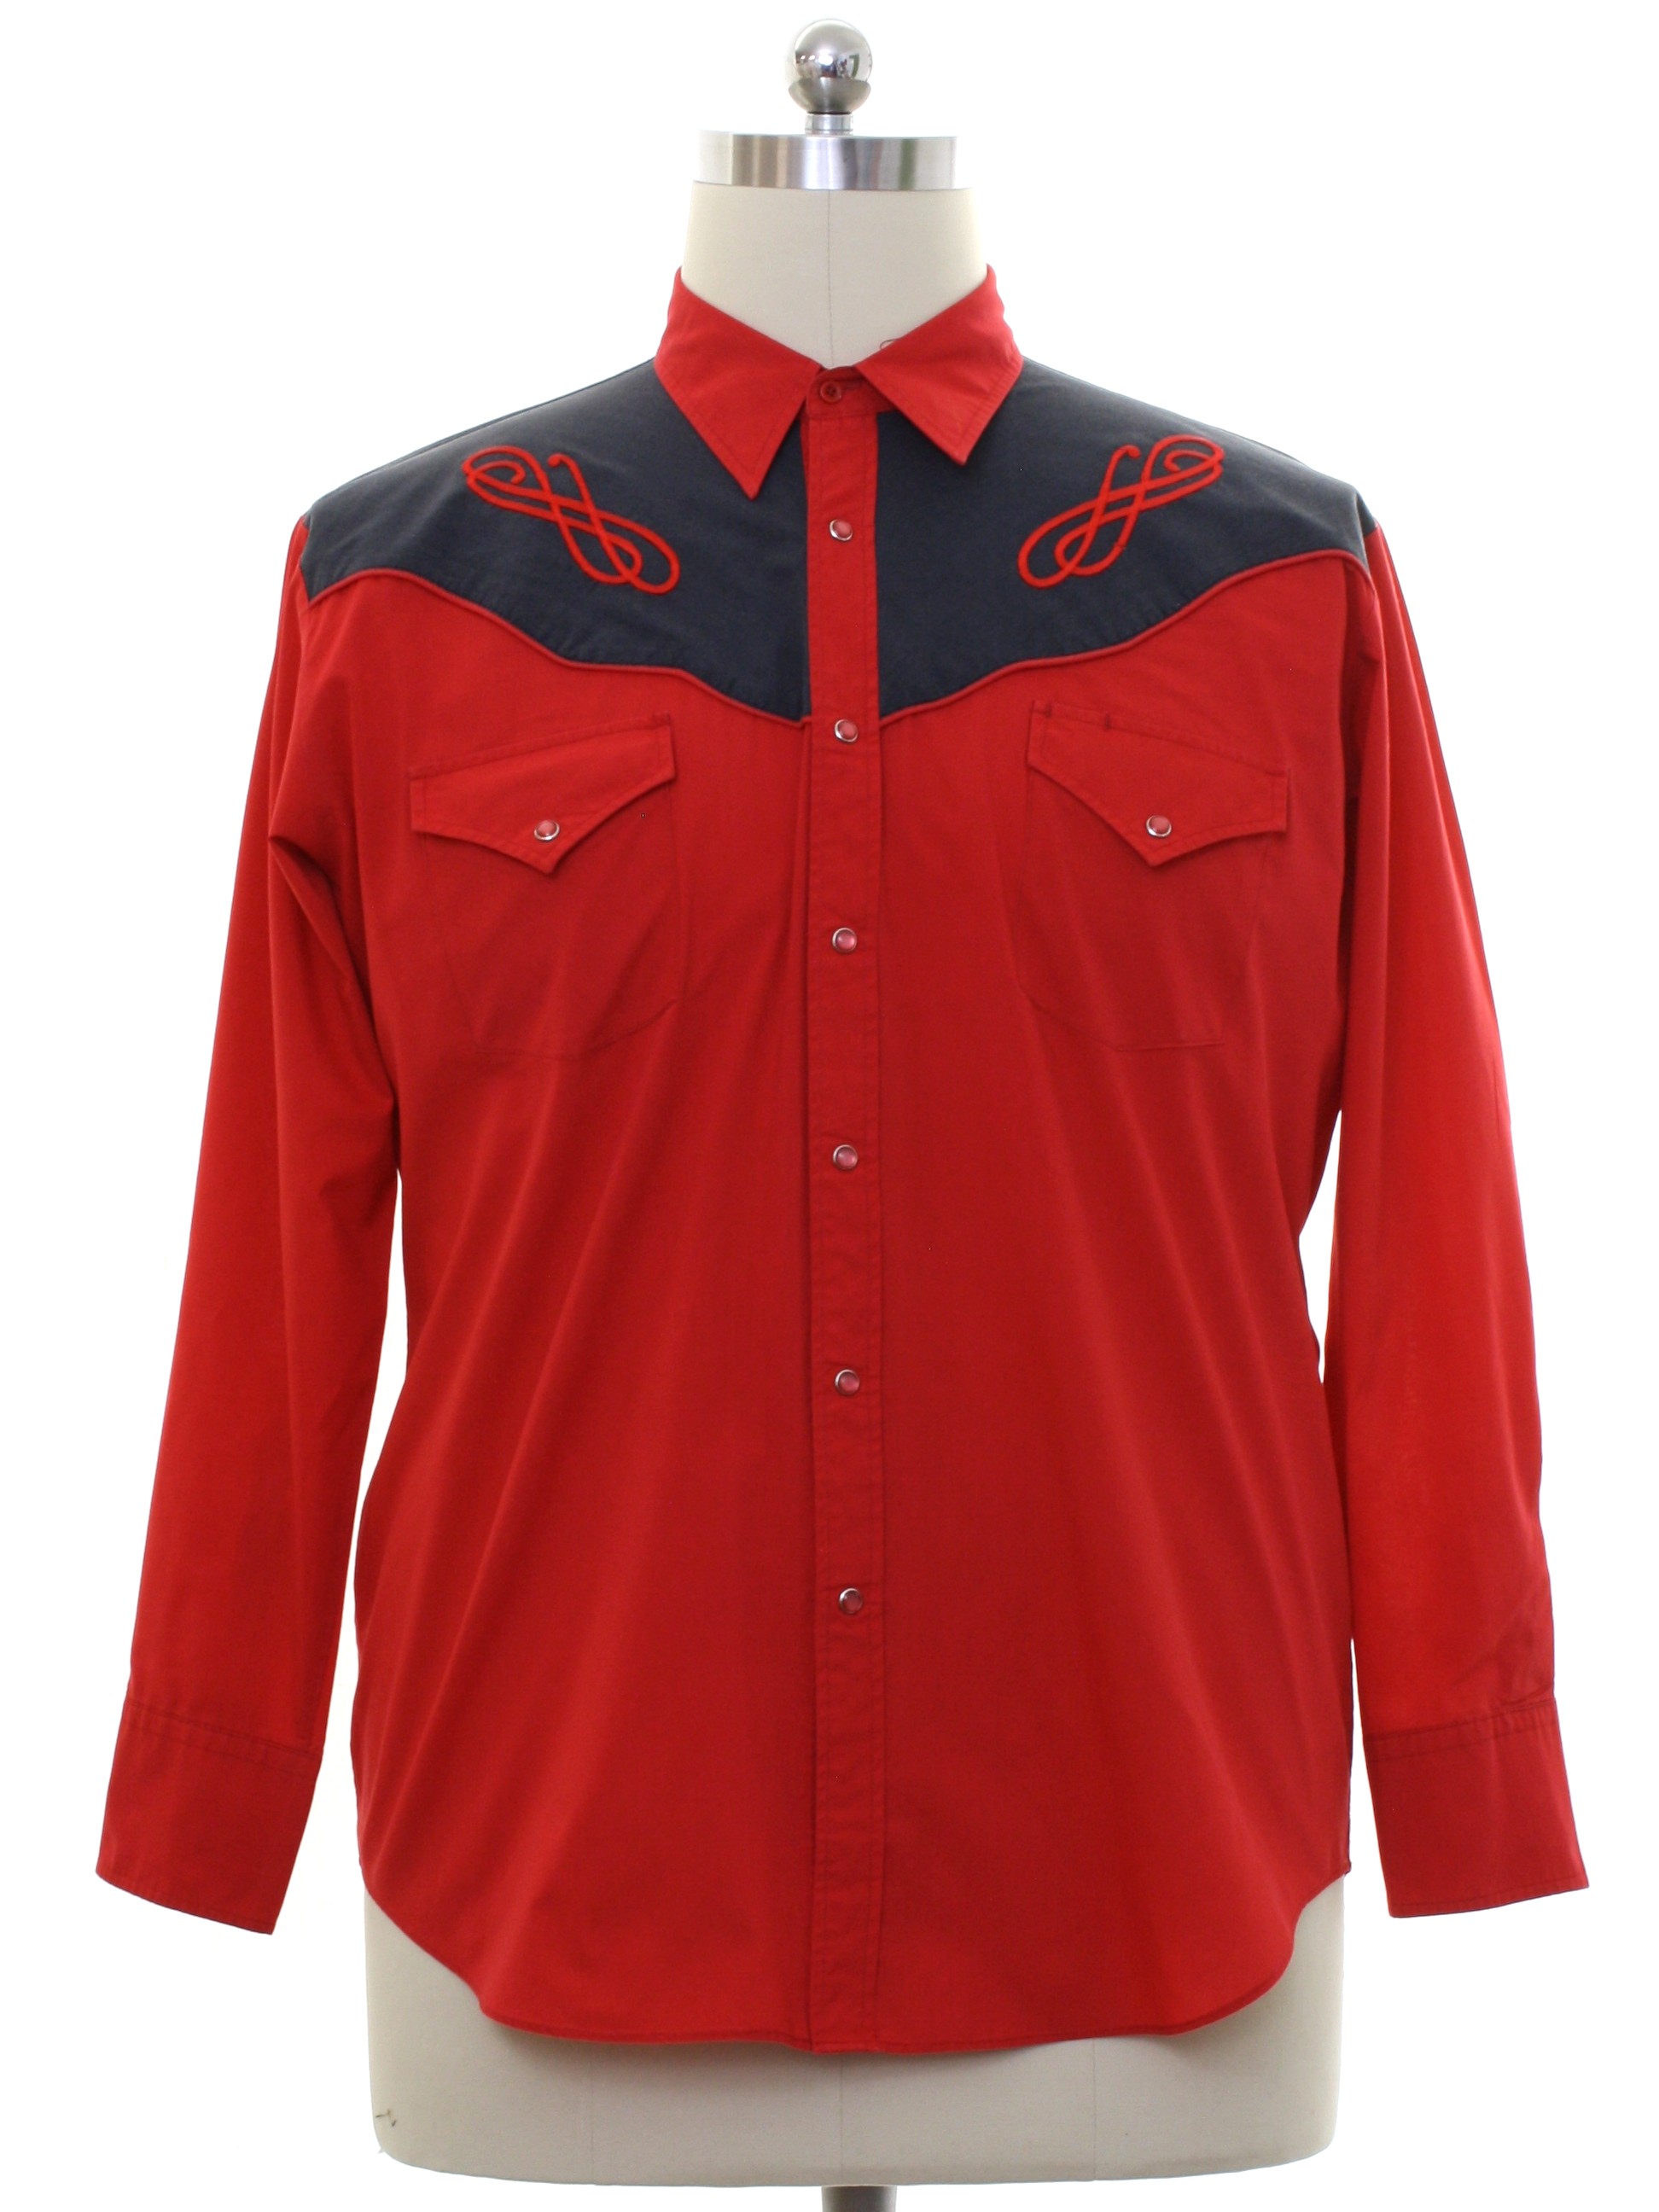 Western Shirt: 90s -Ely Diamond- Mens red background polyester cotton ...